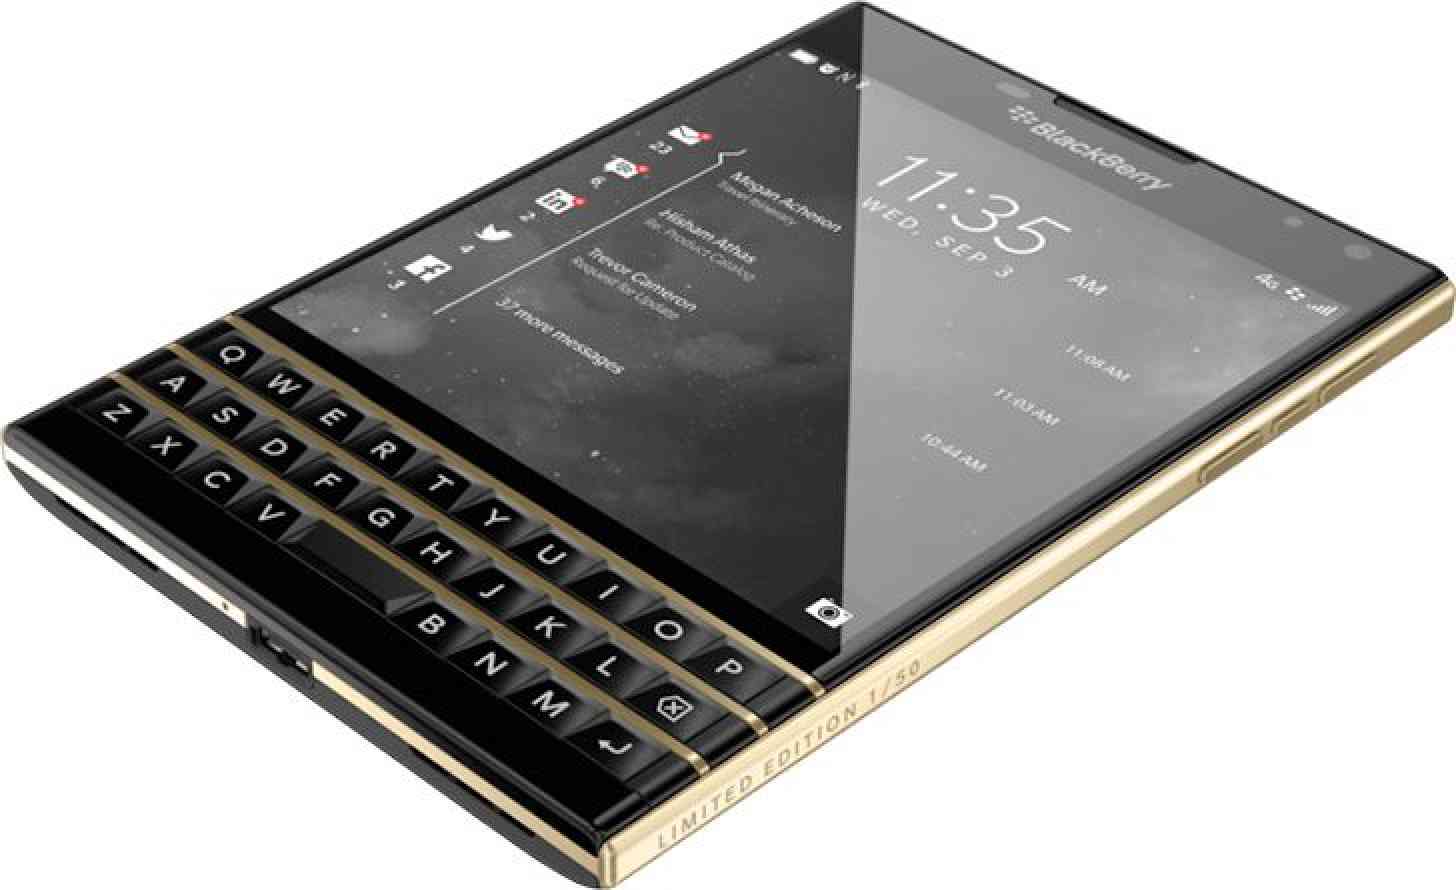 Limited Edition Black and Gold BlackBerry Passport front